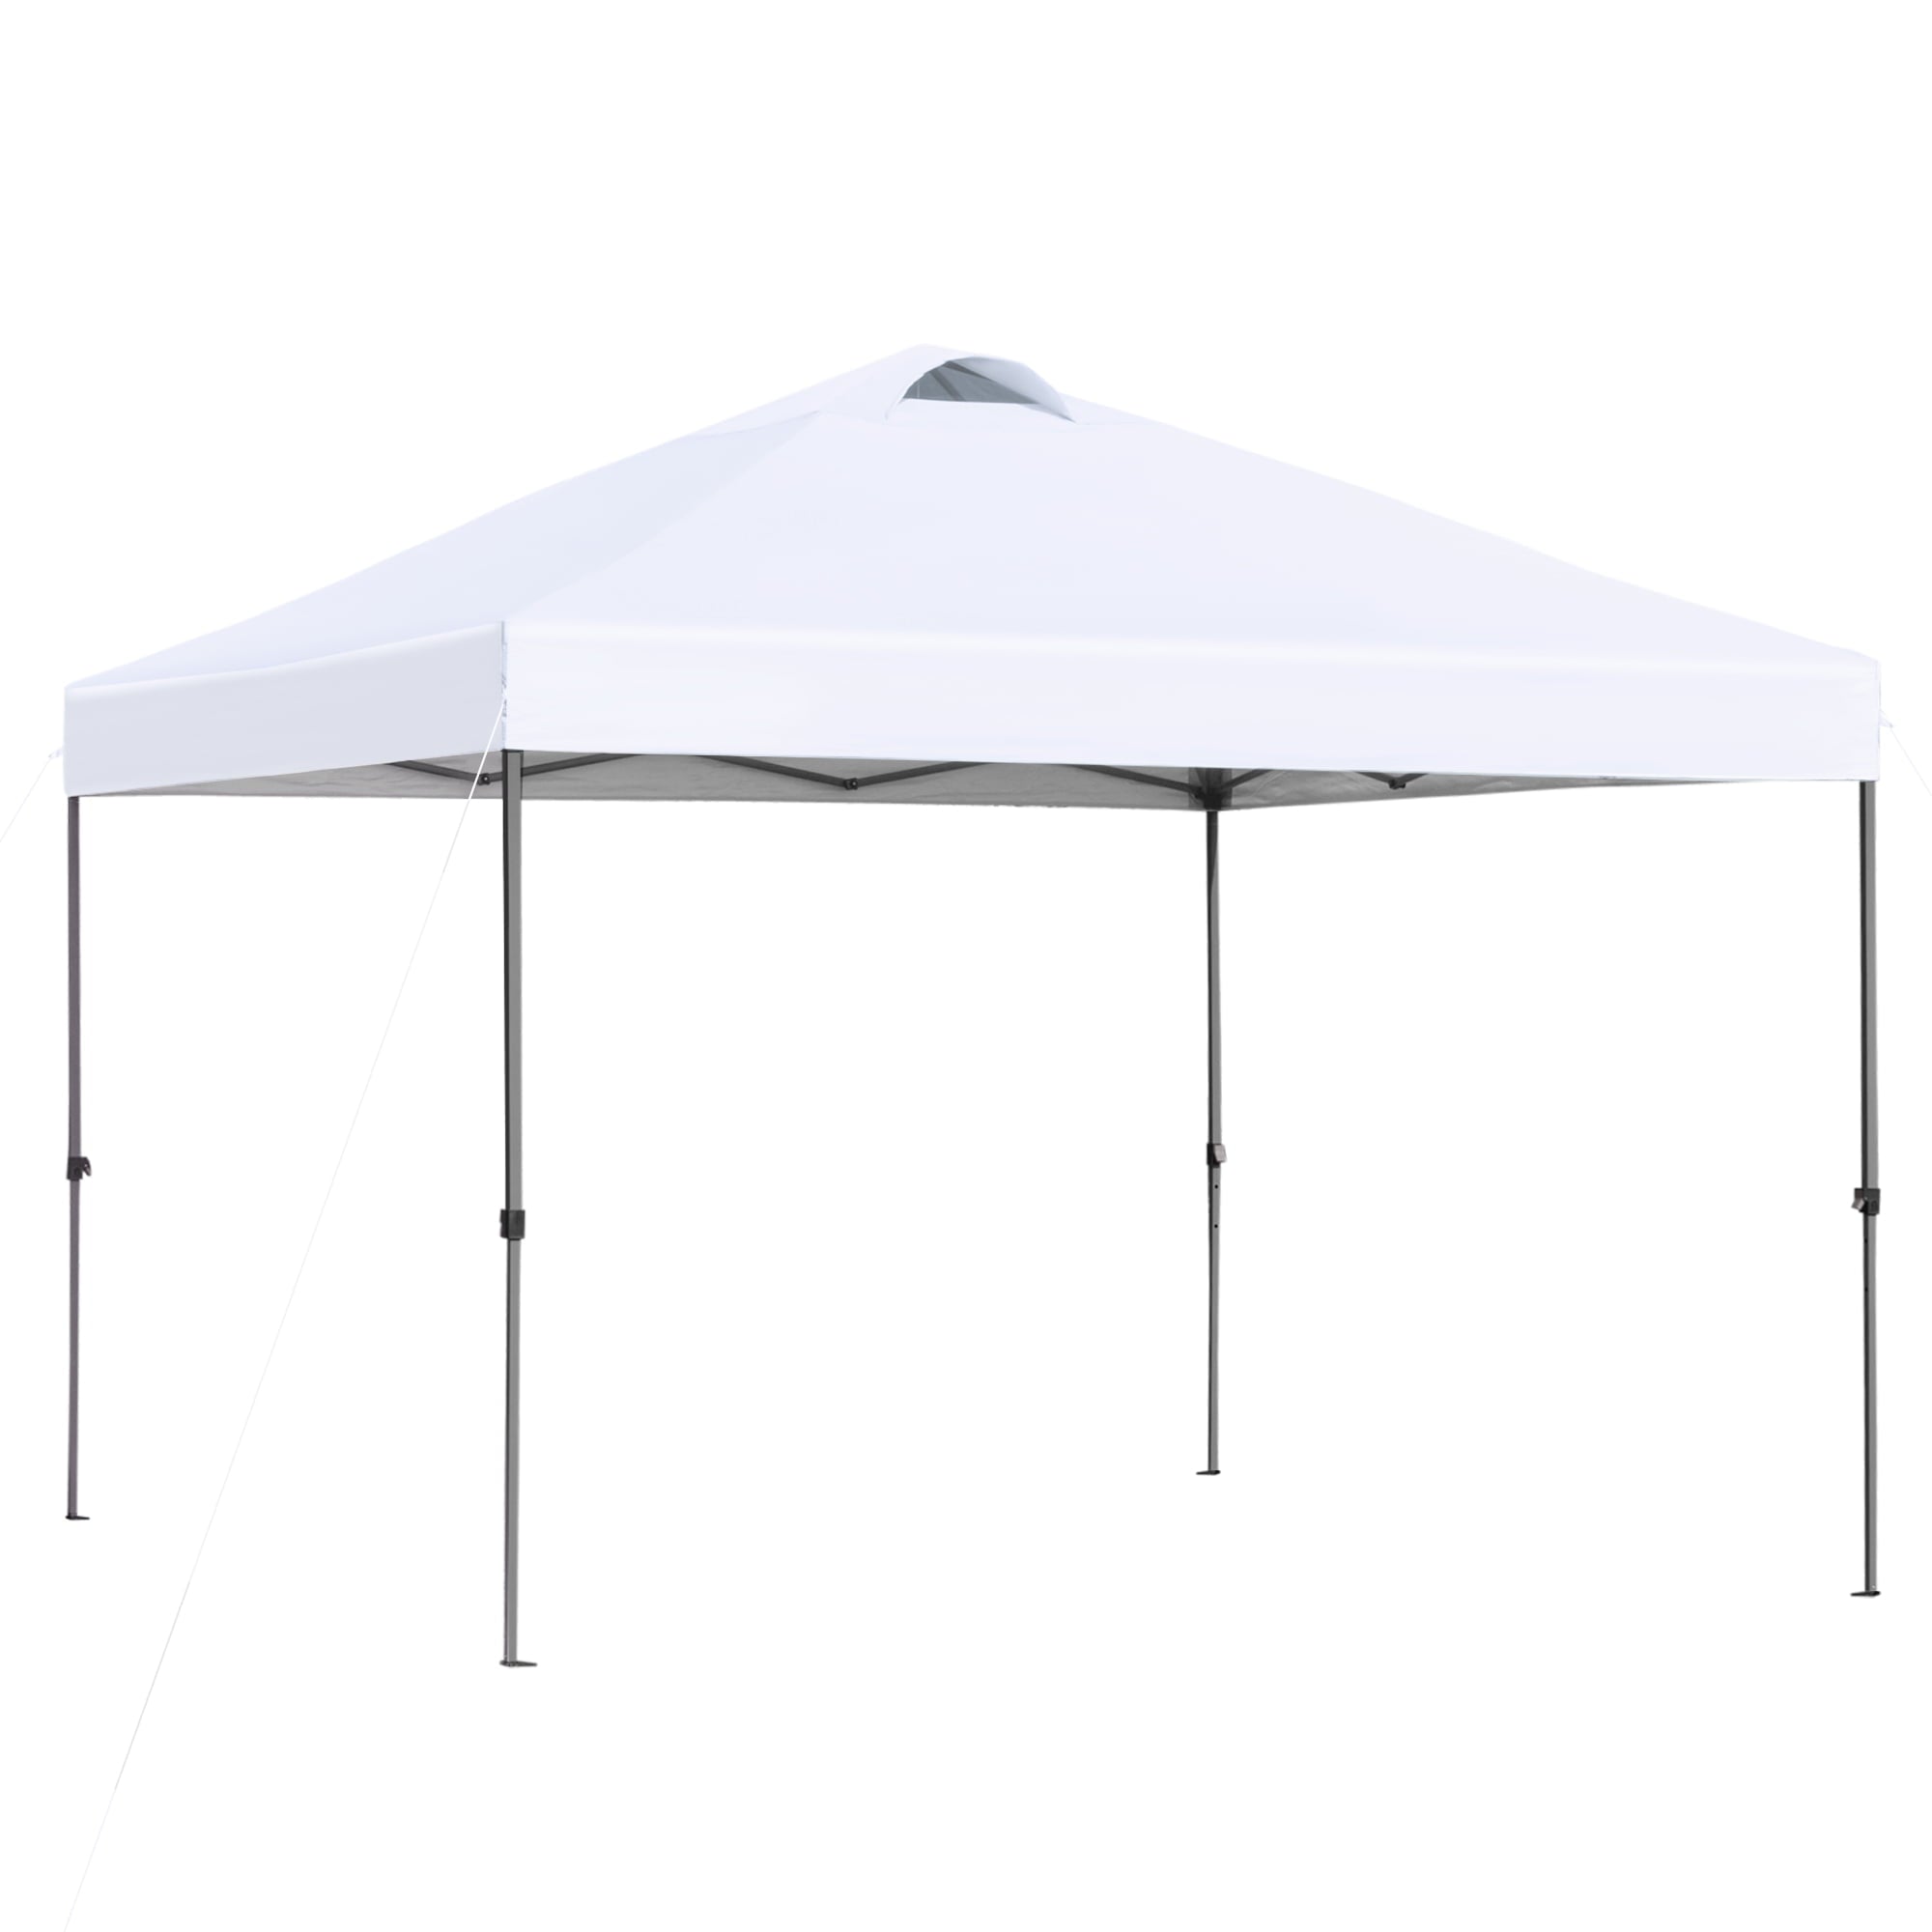 Outsunny 10' x 10' Outdoor Pop-Up Party Tent Canopy with Airy Top Vent, White